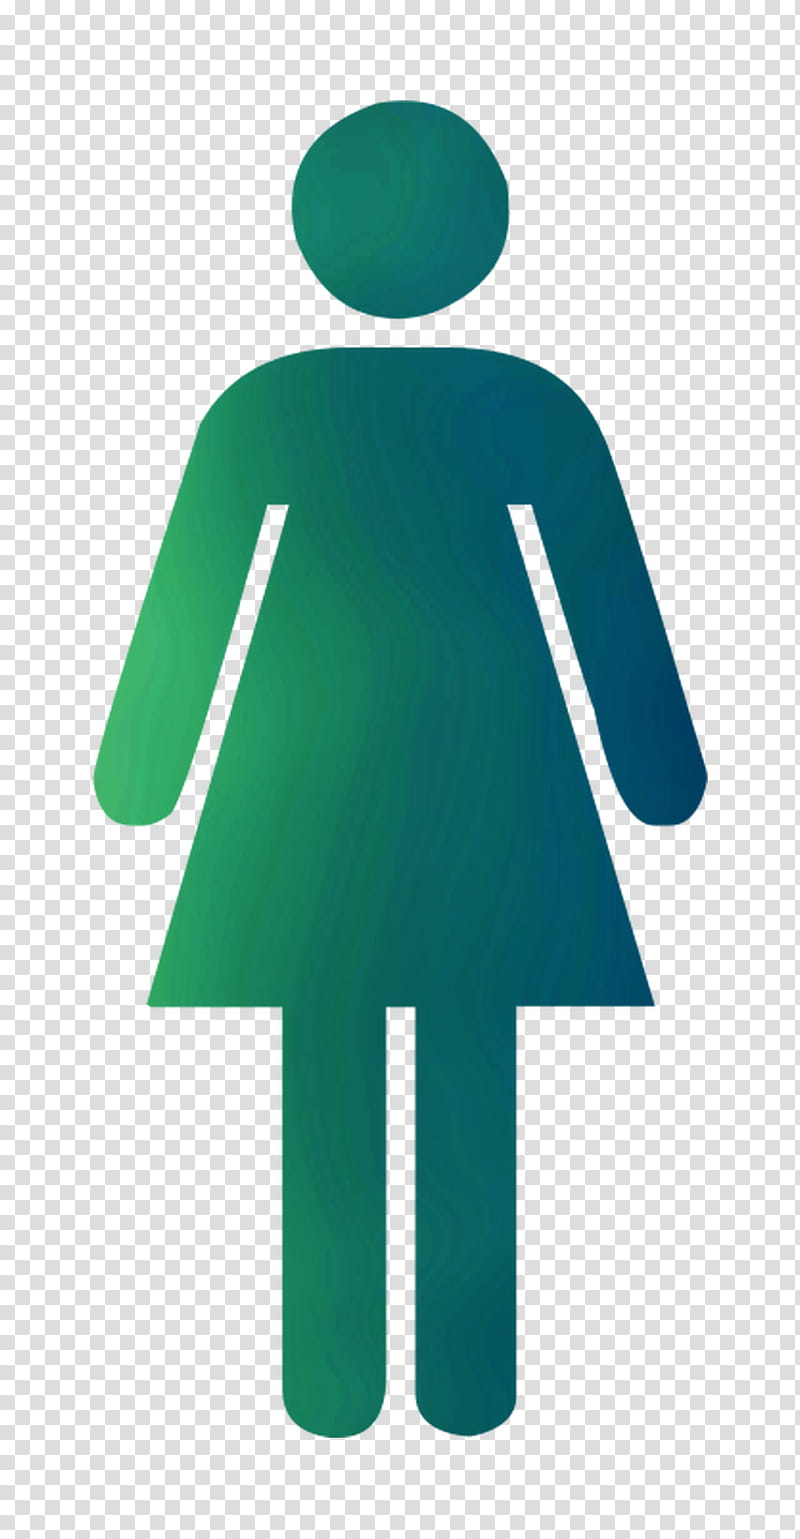 Man, Public Toilet, Sign, Woman, Bathroom, Changing Room, Female, Symbol transparent background PNG clipart